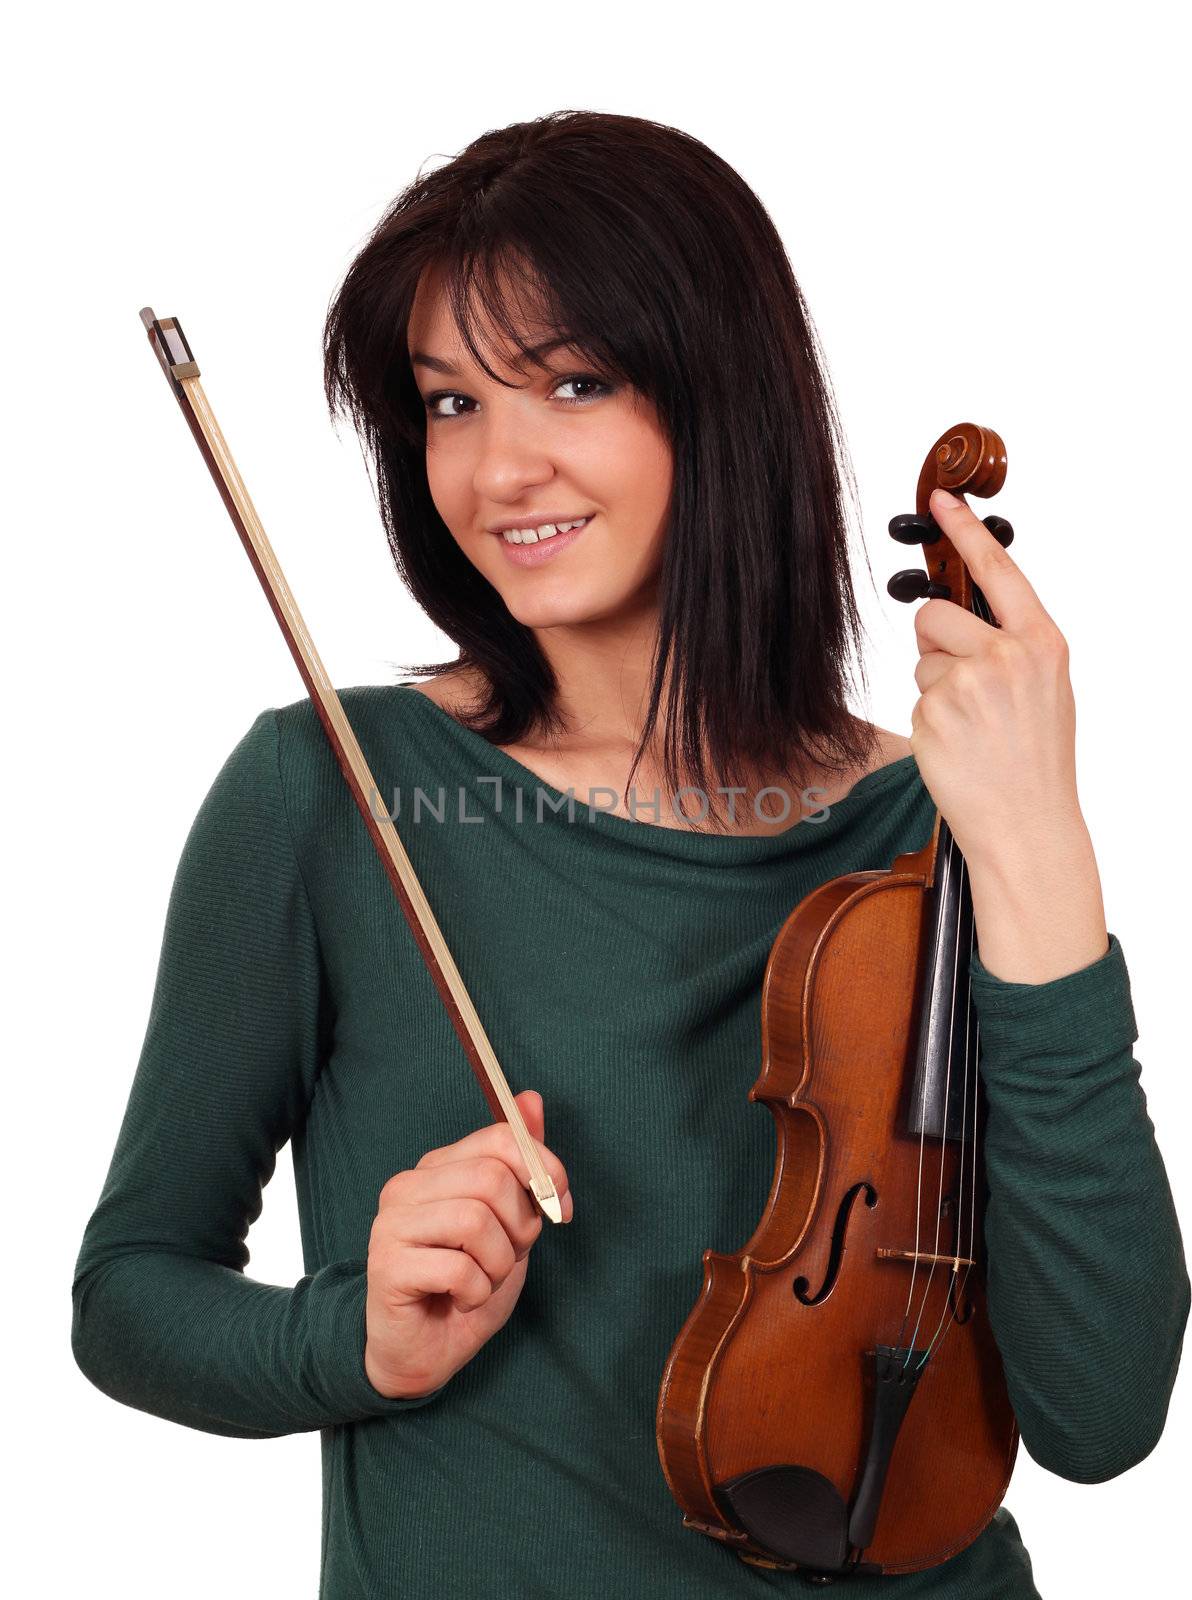 beautiful girl with violin portrait by goce